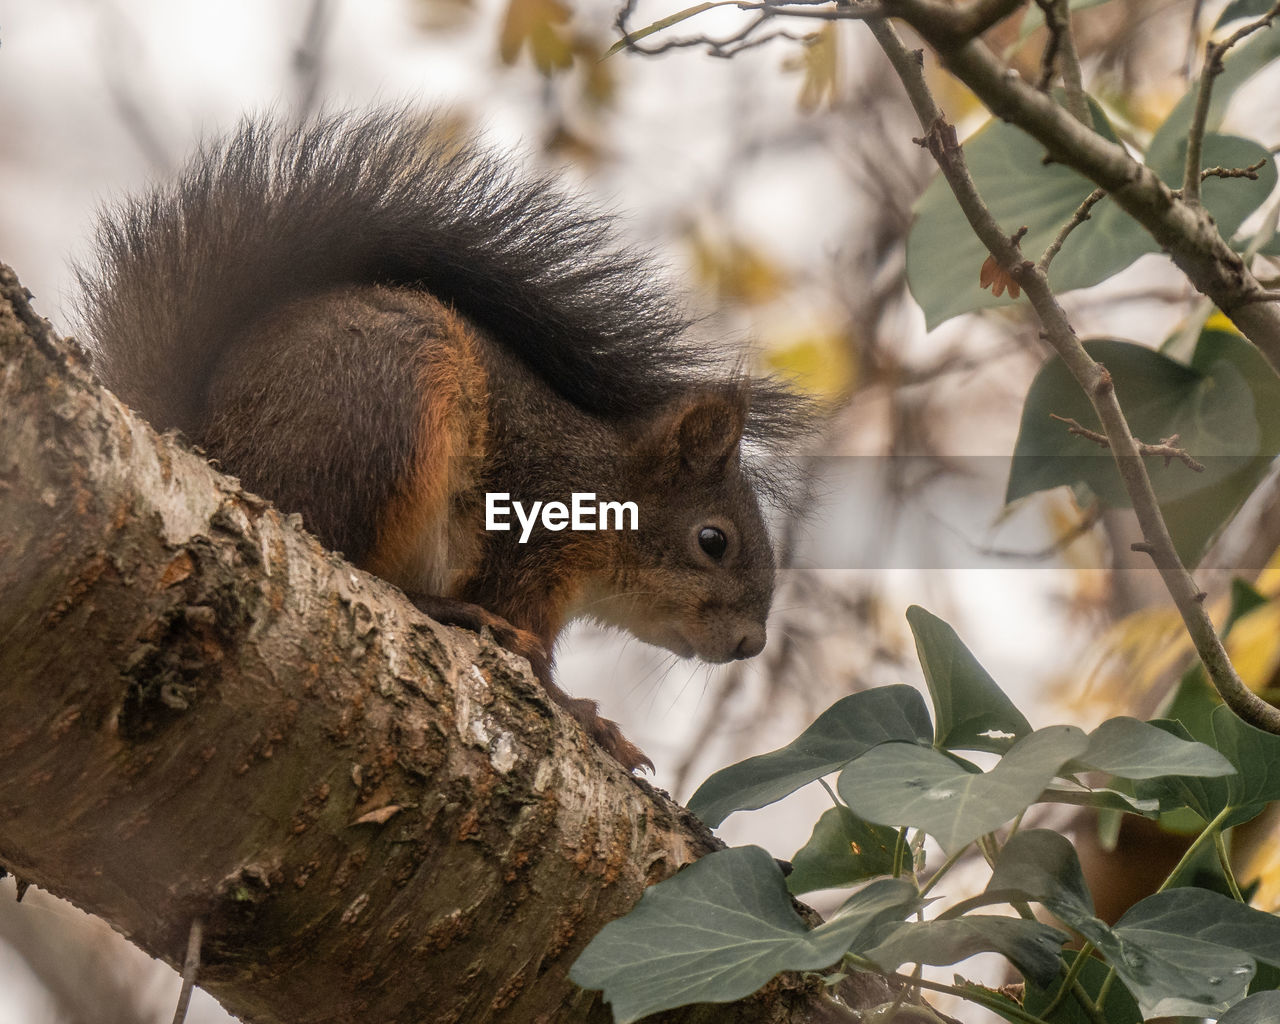 CLOSE-UP OF SQUIRREL ON TREE BRANCH